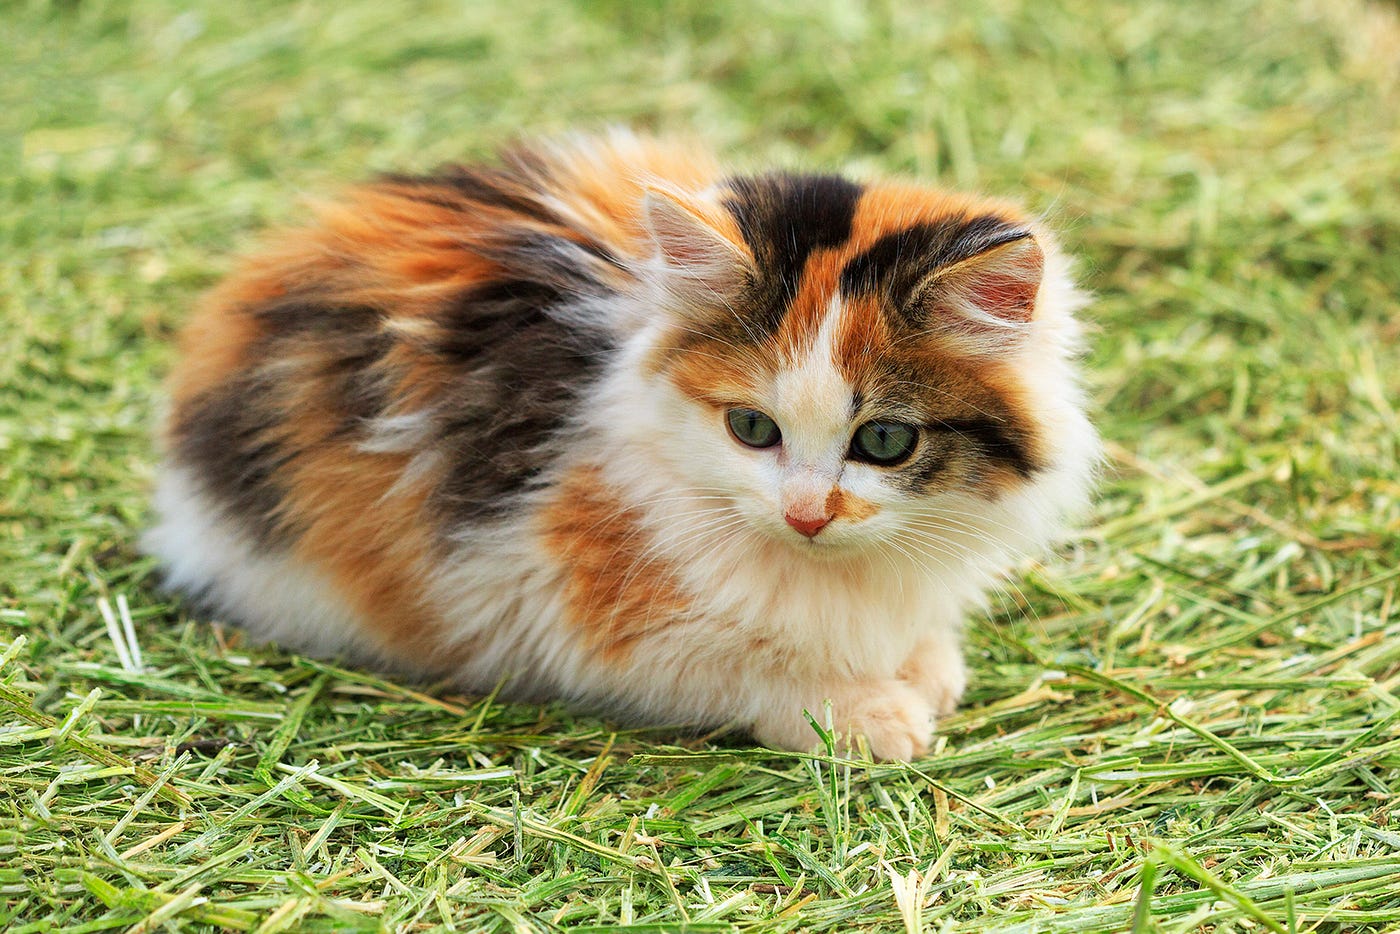 31 Amazing Facts About Calico Cats - Facts.net